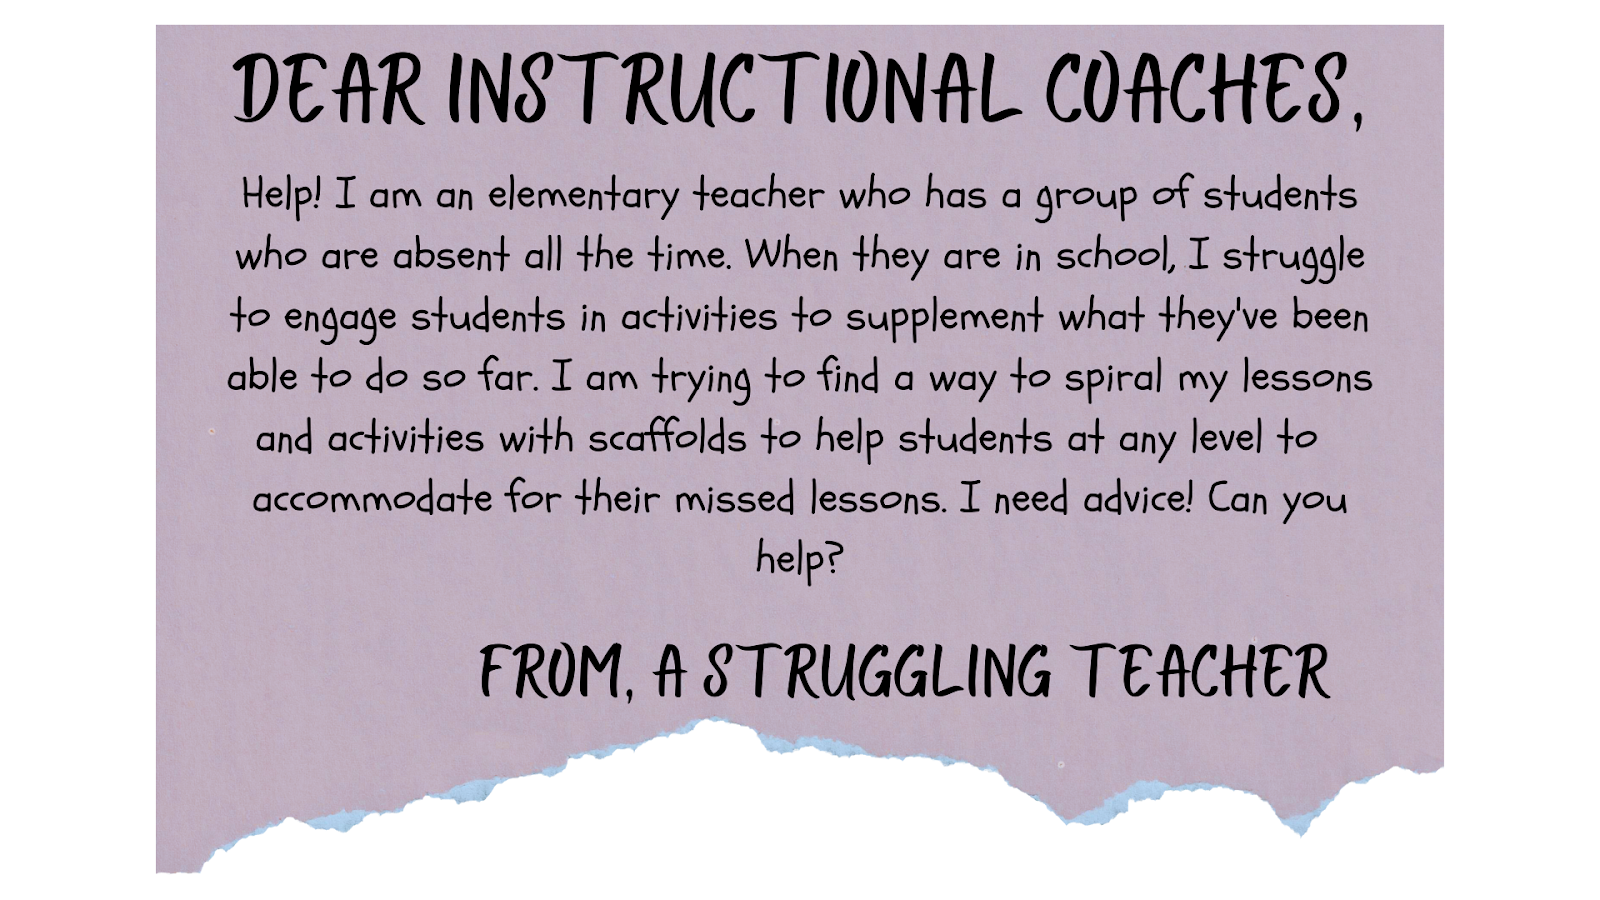 Dear Instructional Coaches, Help! I am an elementary teacher who has a group of students who are absent all the time. When they are in school, I struggle to engage students in activities to supplement what they've been able to do so far. I am trying to find a way to spiral my lessons and activities with scaffolds to help students at any level to  accommodate for their missed lessons. I need advice! Can you help? From, A struggling teacher.